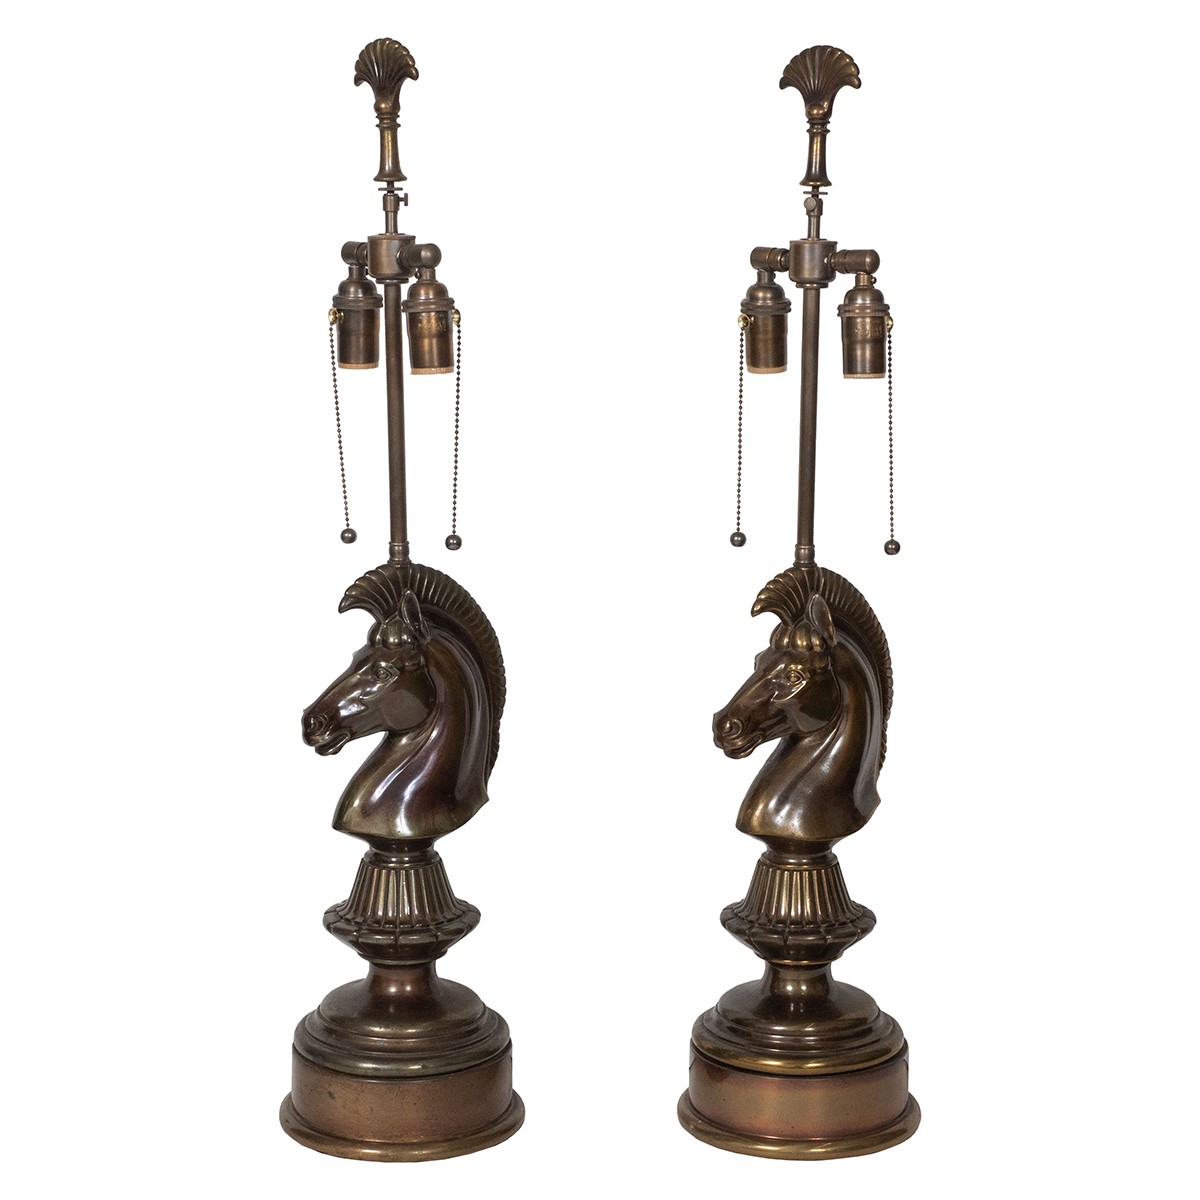 Pair of patinated bronze chess motif lamps